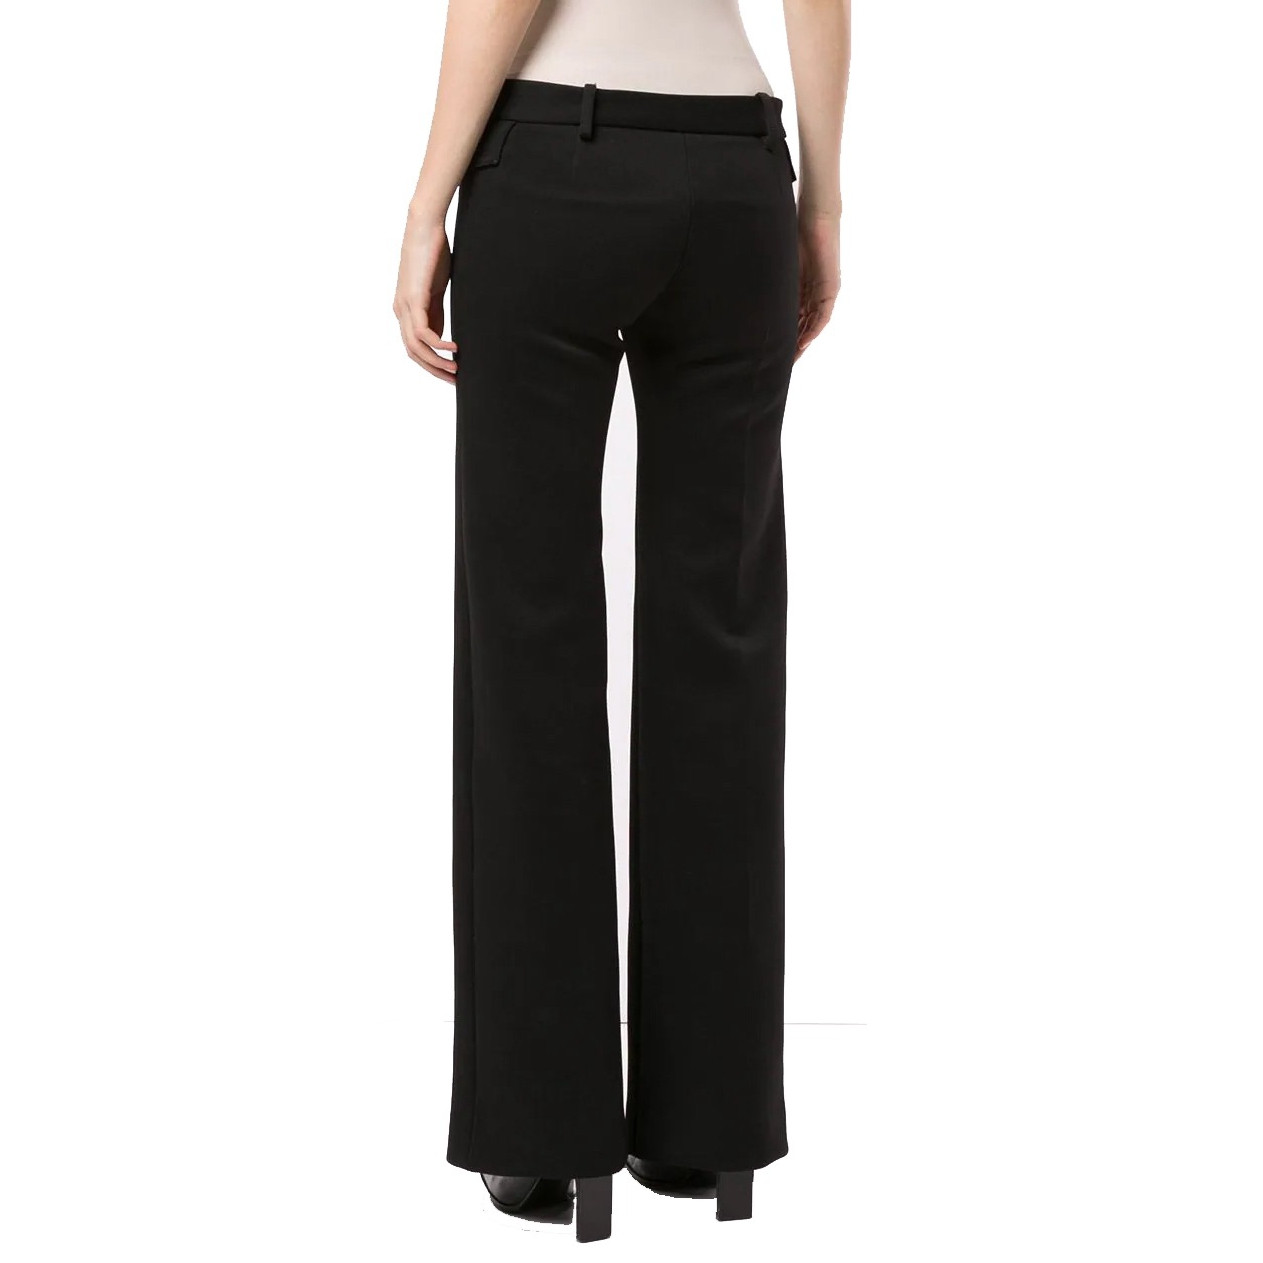 Dion Lee Low Rise Pocket Pants - Flared - Pants - Clothing